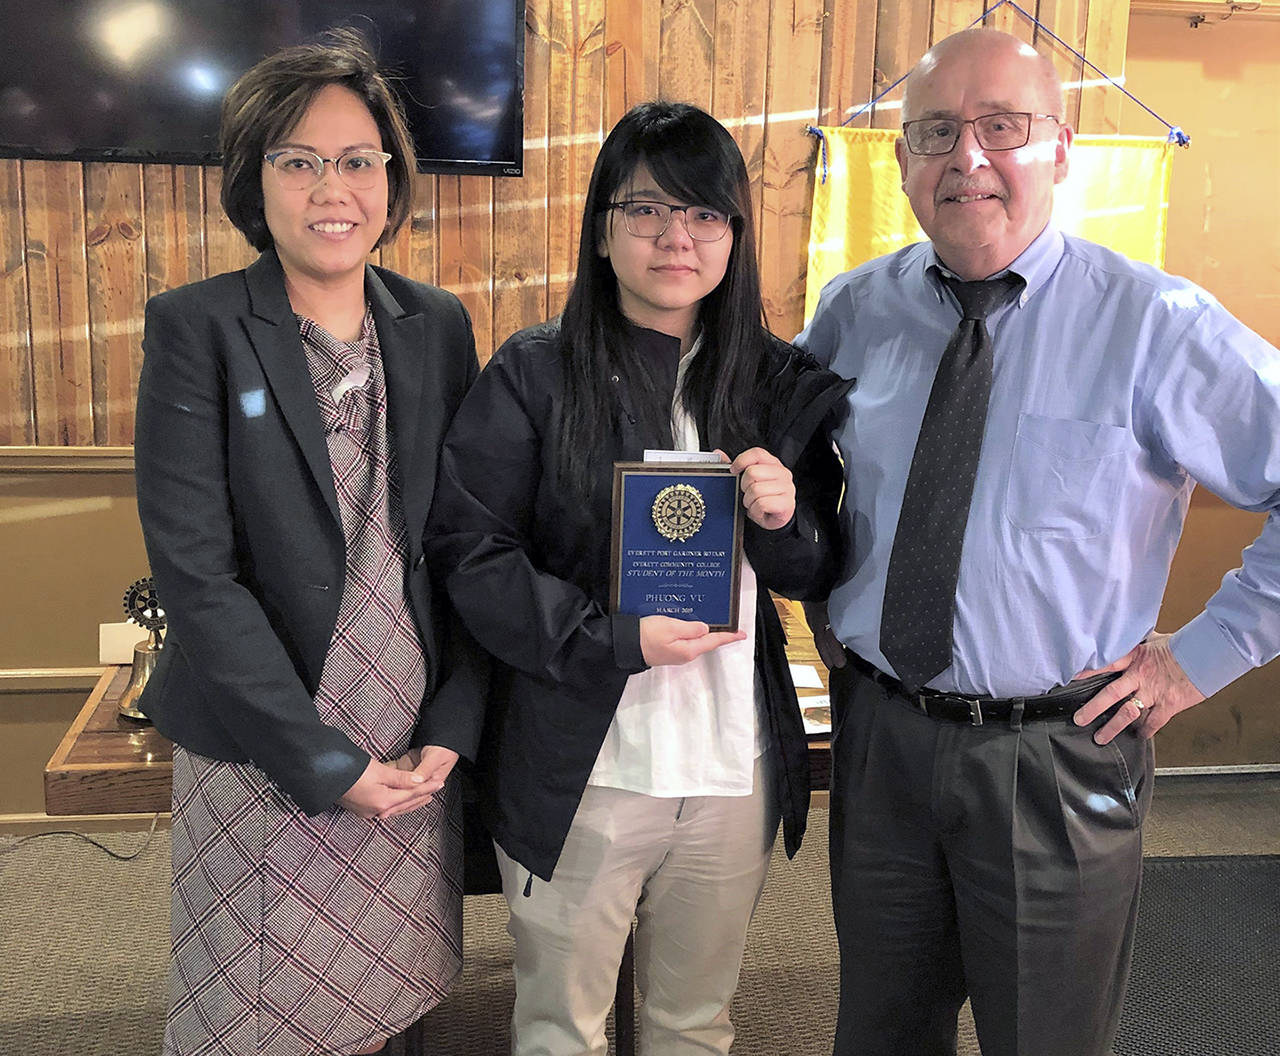 From left, instructor Chayuda Overby, student Phuong Vu and Reid Shockey, president elect of Rotary of Everett Port Gardner. (Submitted photo)